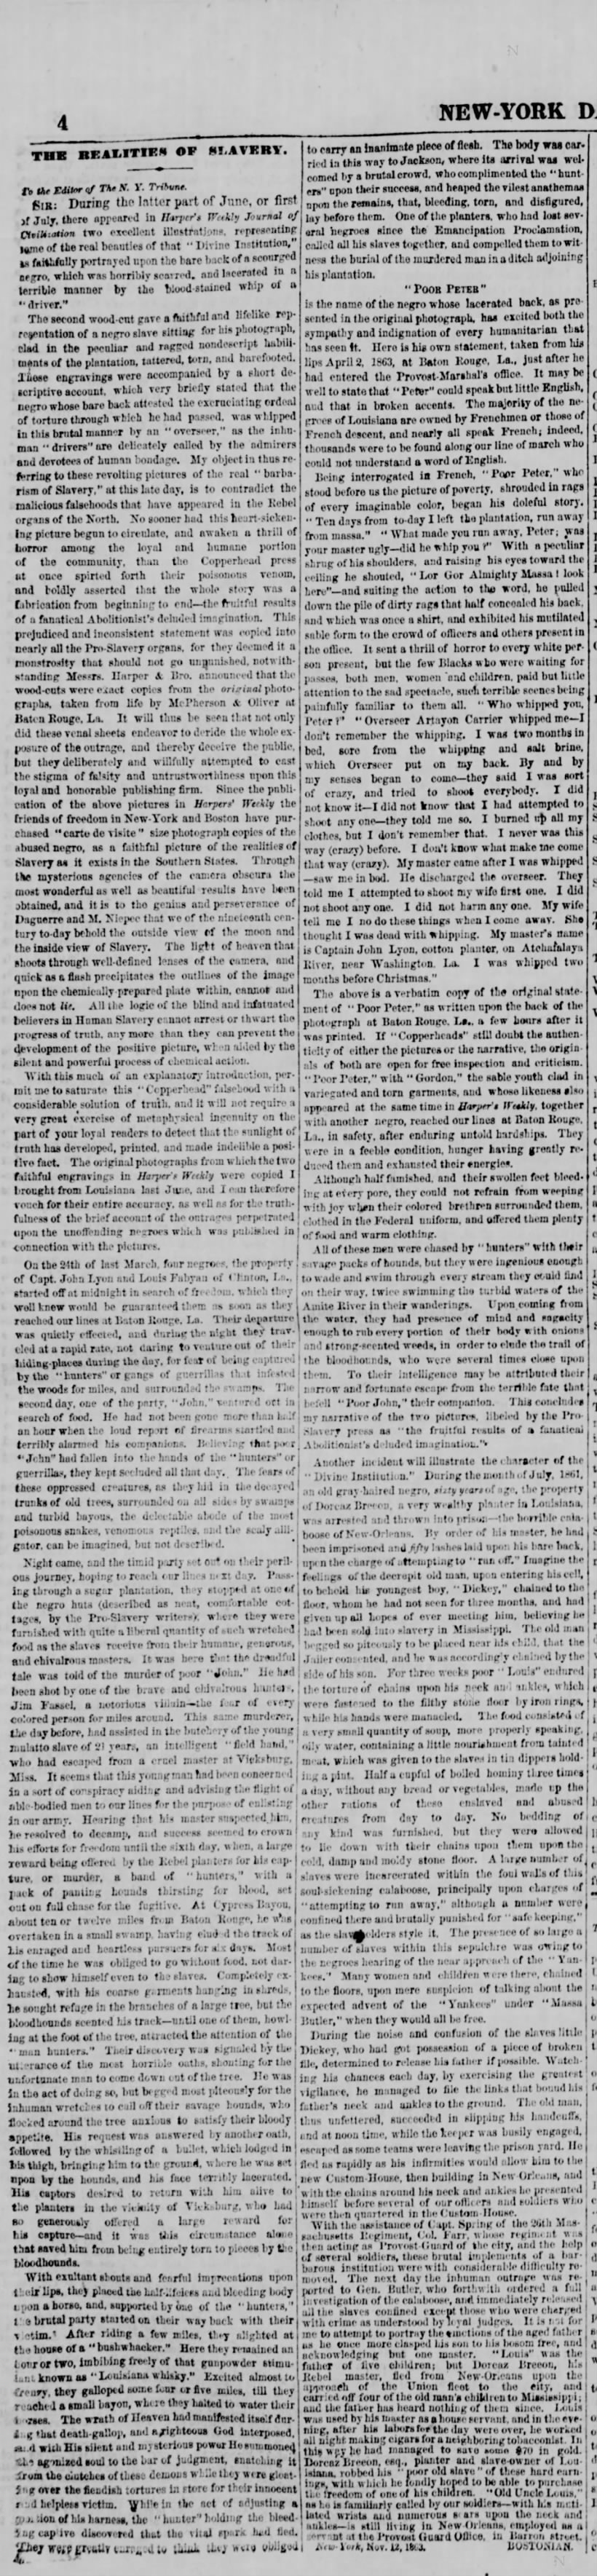 The Realities of Slavery: To the Editor of the N.Y. Tribune